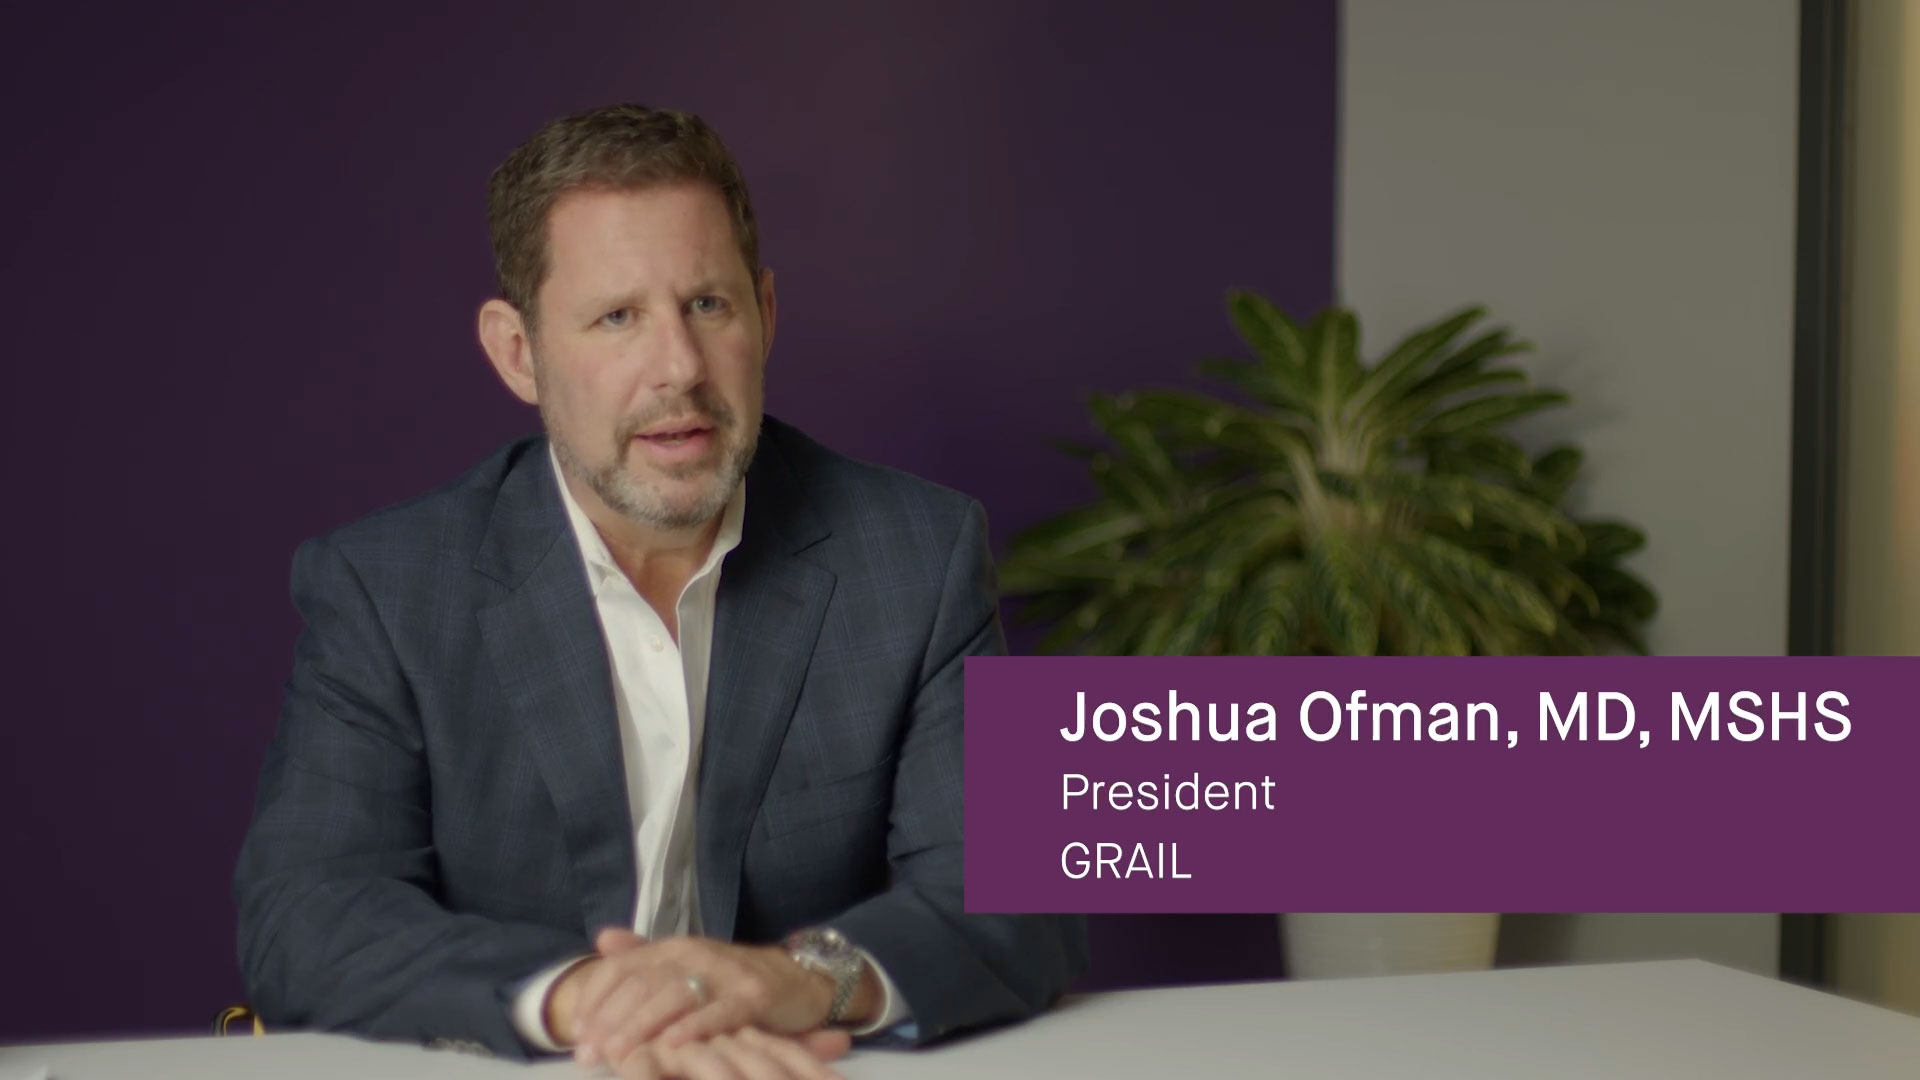 Josh Ofman, President at GRAIL, speaks about the company's clinical surveillance program.